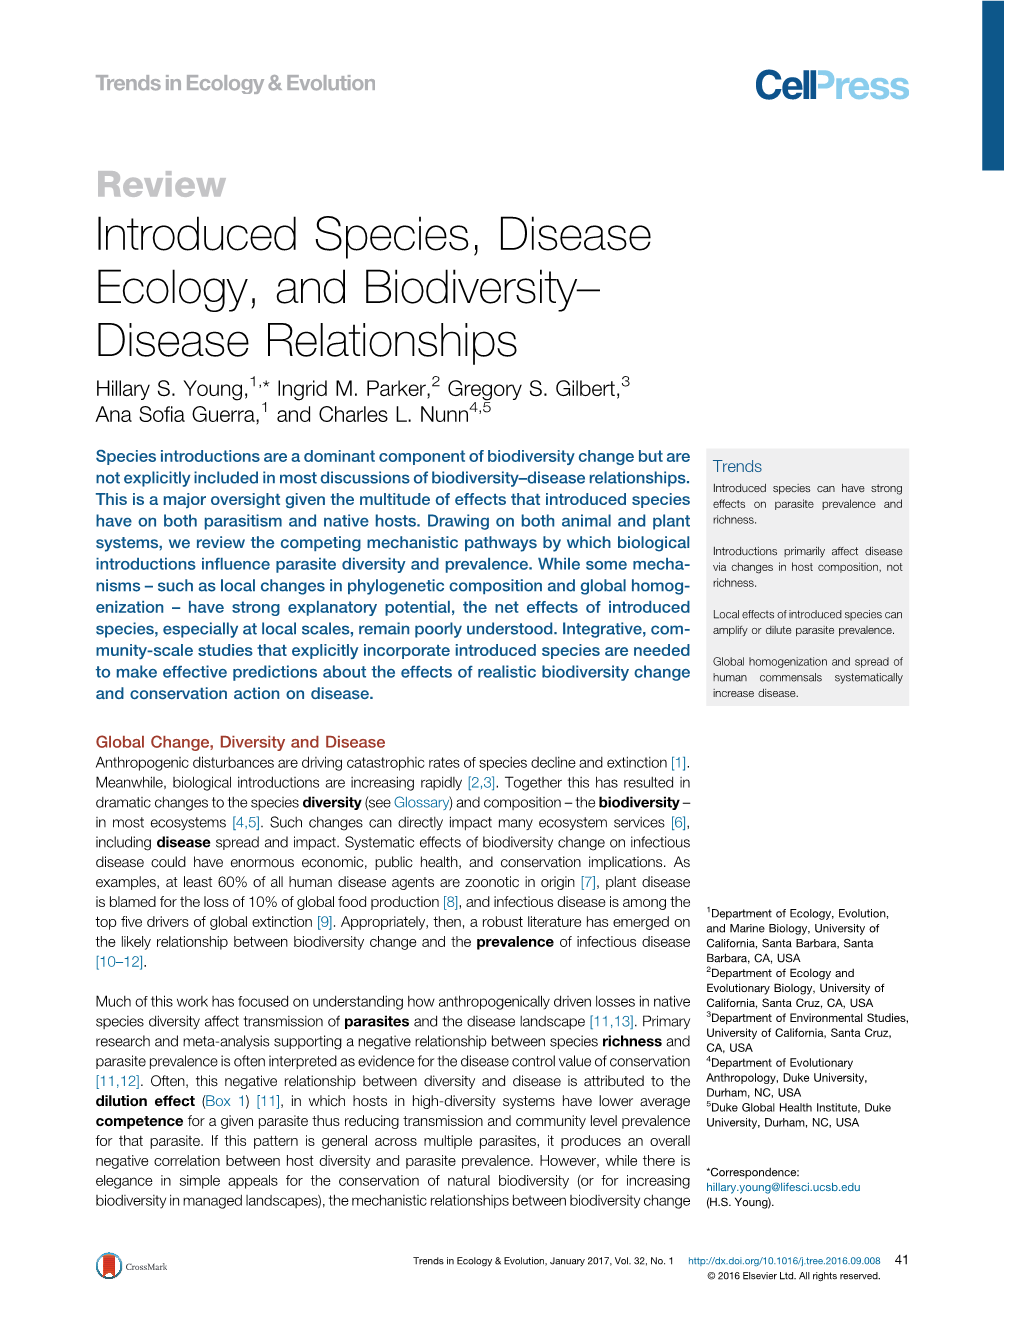 Introduced Species, Disease Ecology, and Biodiversity